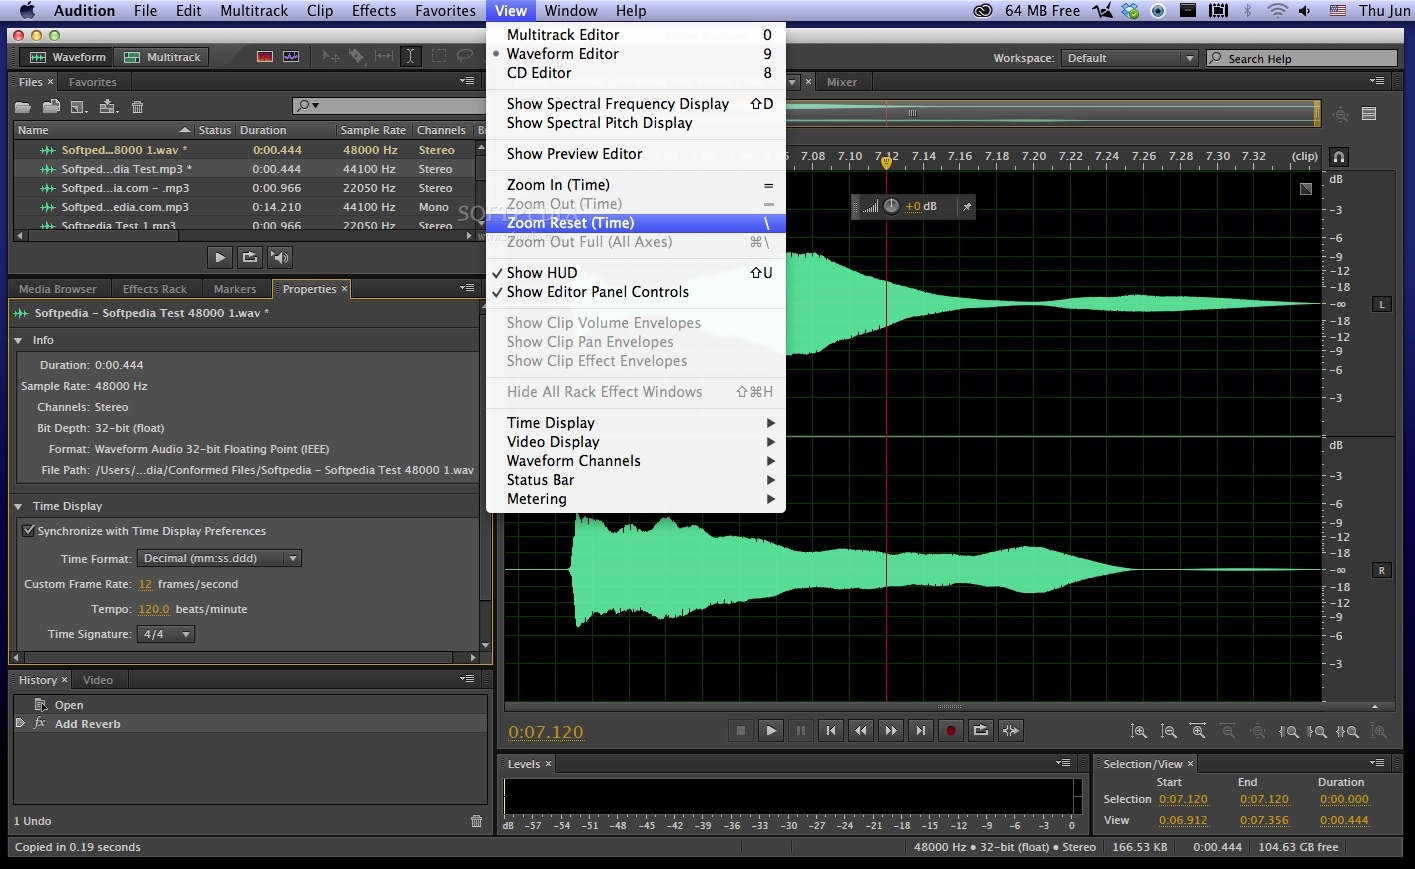 adobe audition for mac 10.7